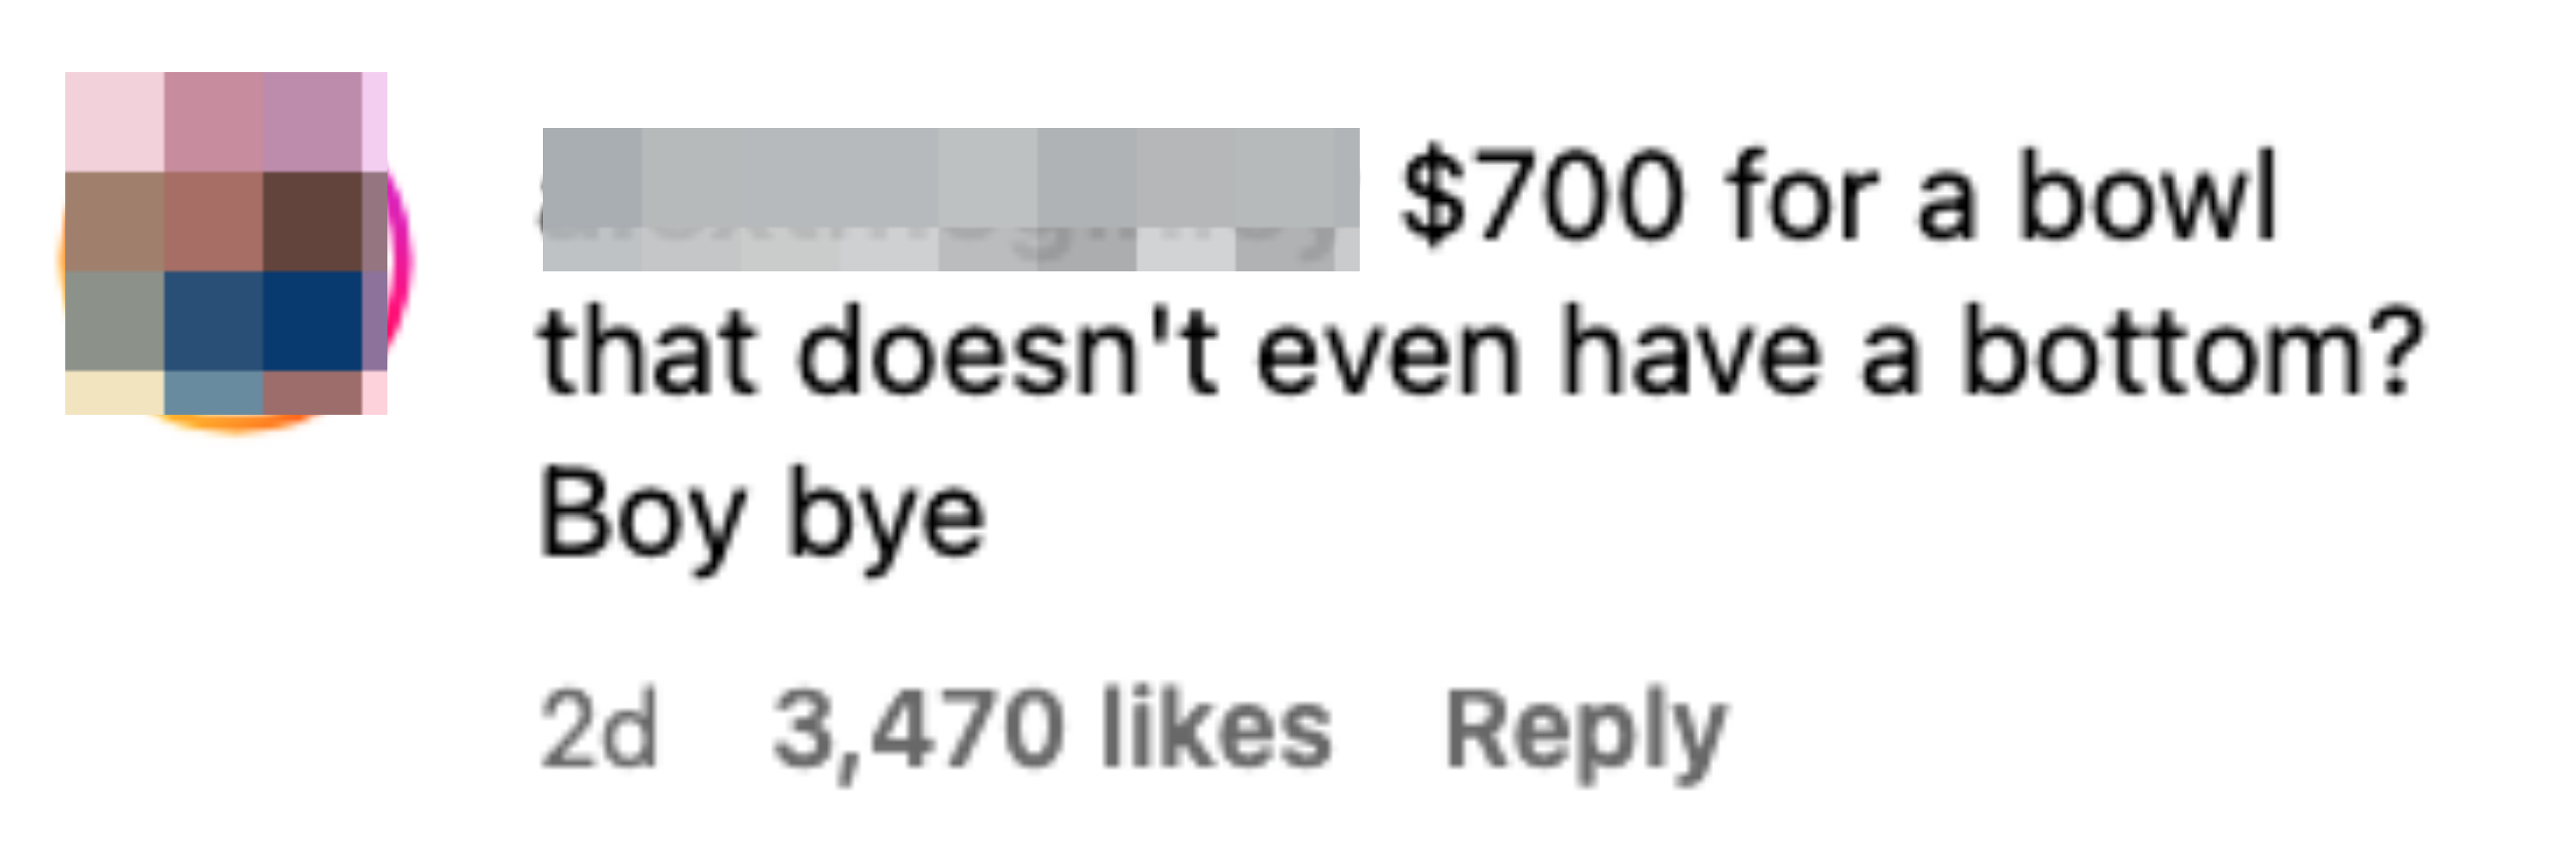 Social media comment criticizing the price of a bottomless bowl